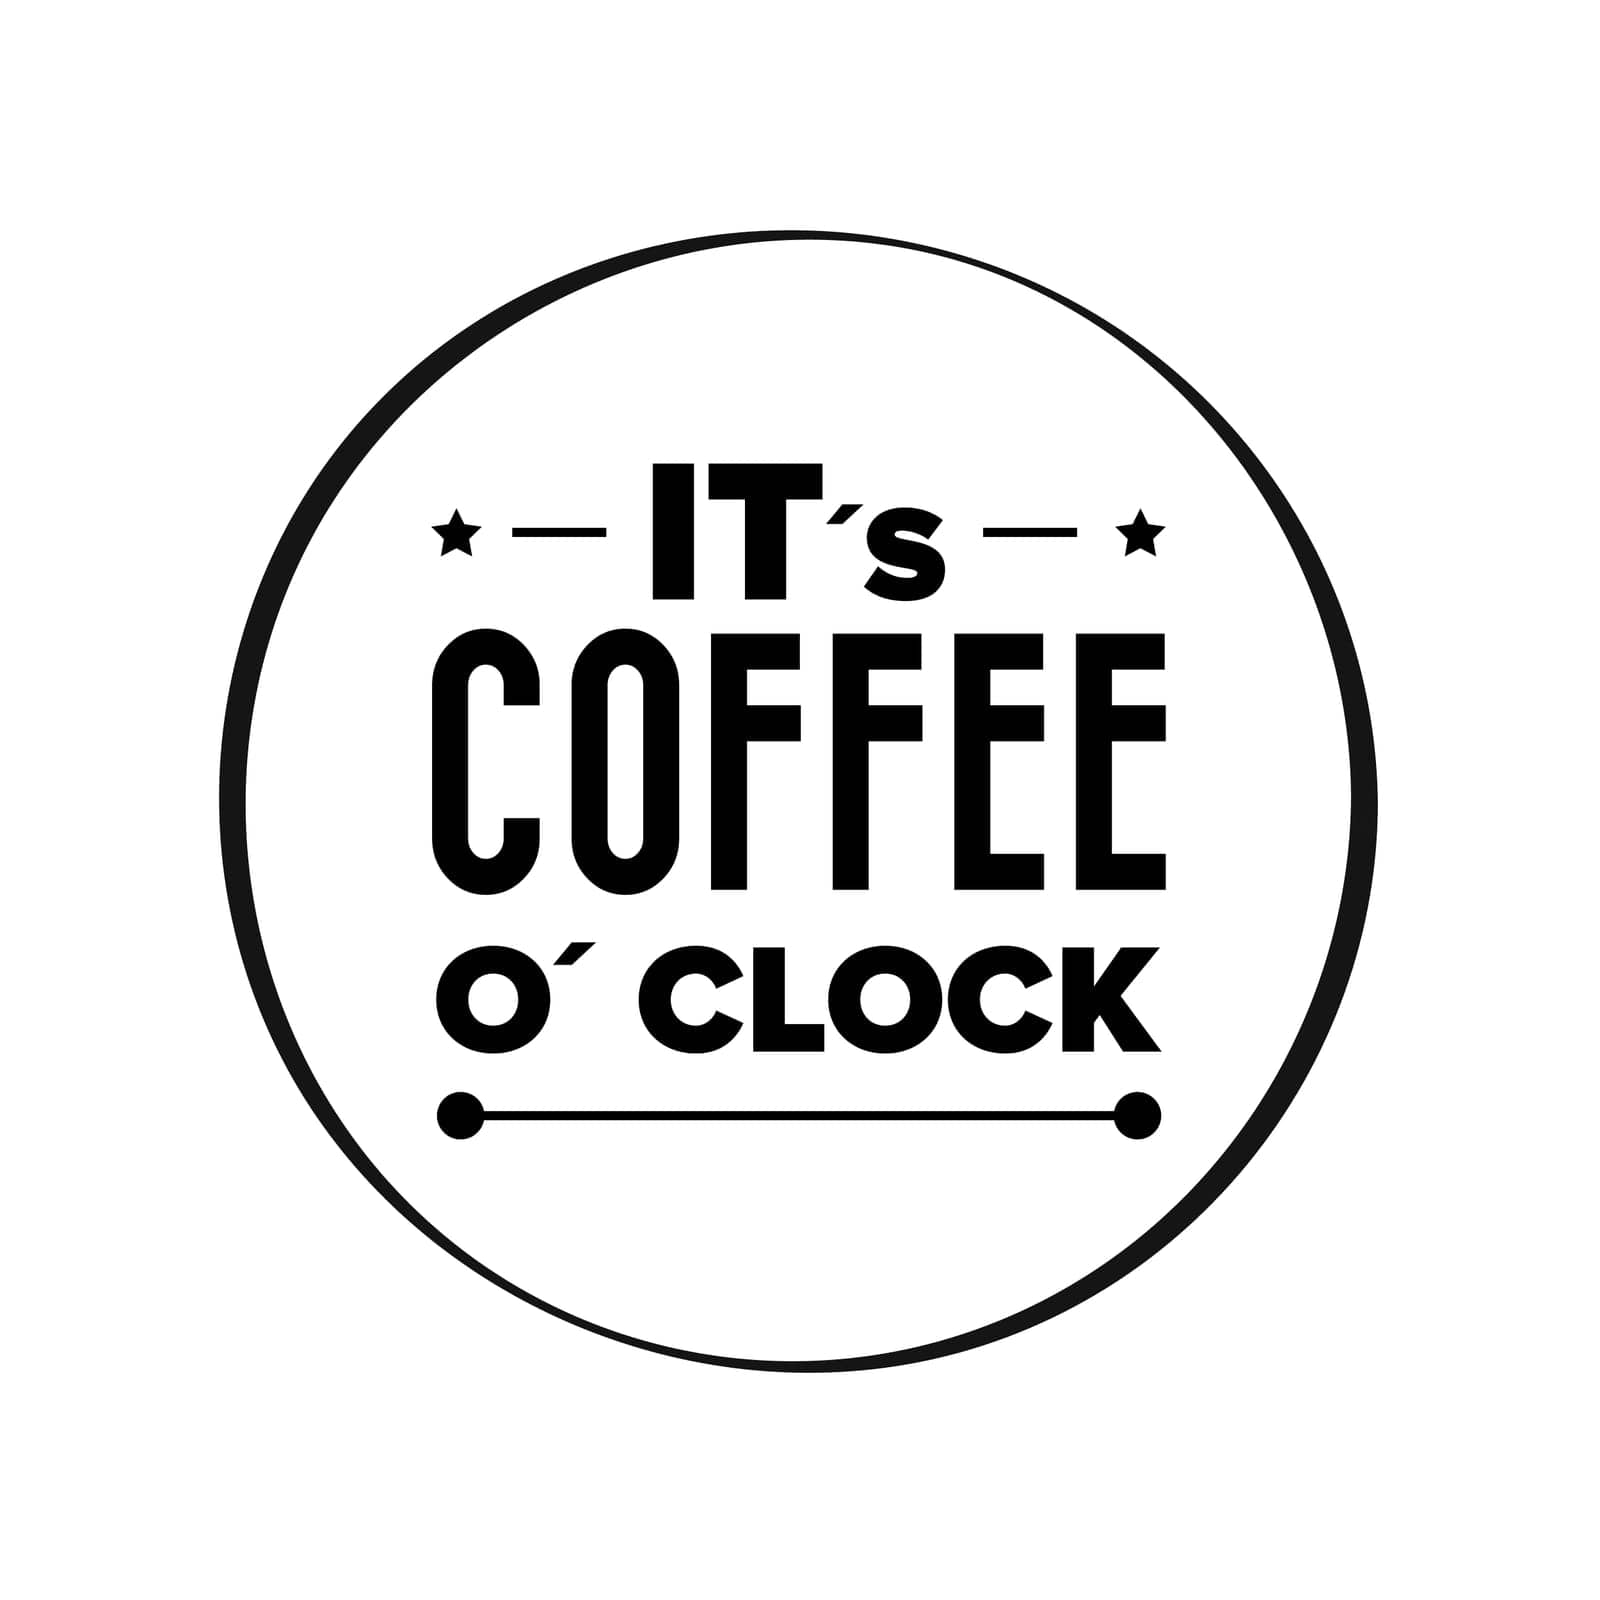 Its coffee o clock sign by Nutil